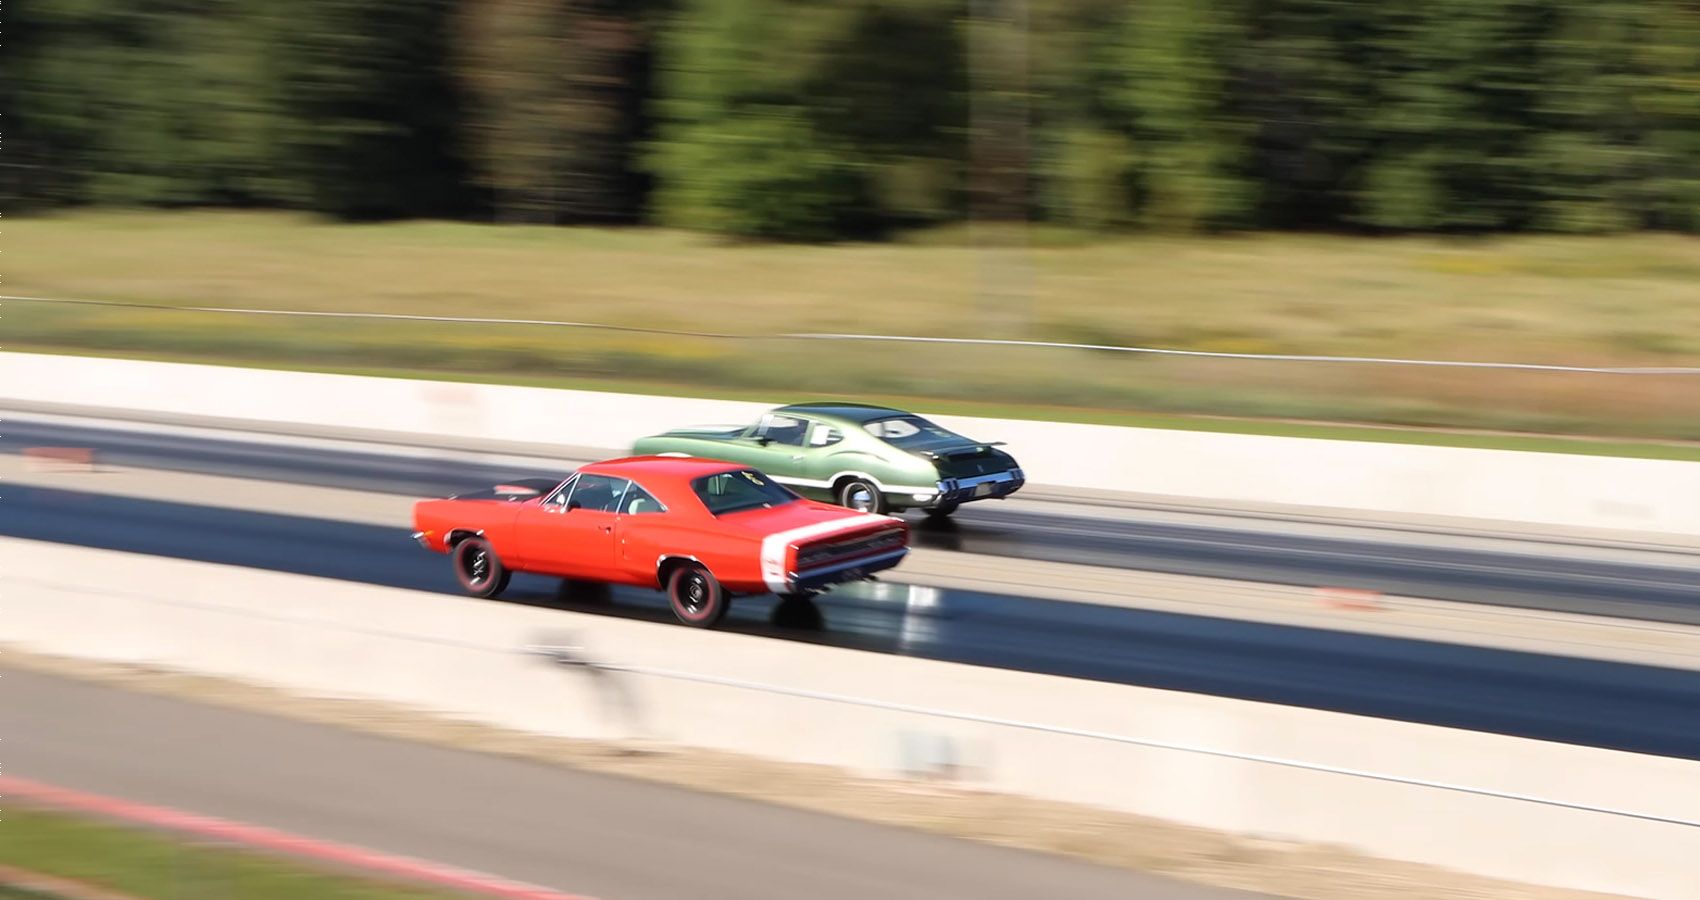 Stock Drag Race Between A 1969 Dodge Super Bee A12 And A 1970 Oldsmobile F85 W 31